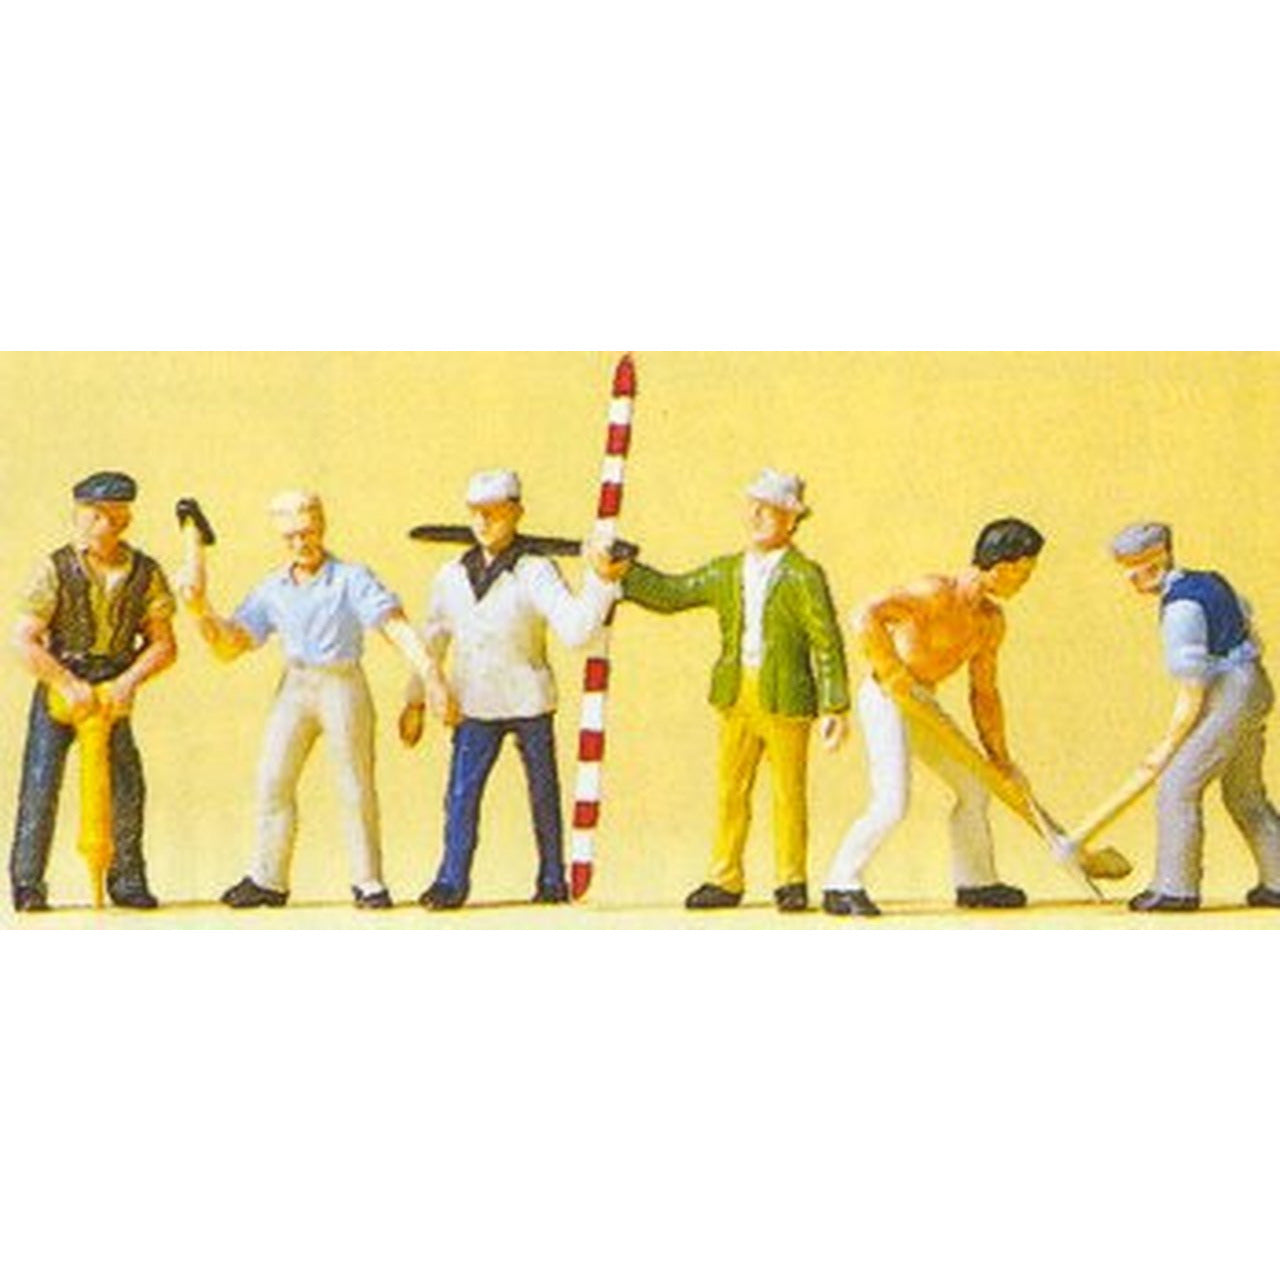 Road Construction Workers (HO)